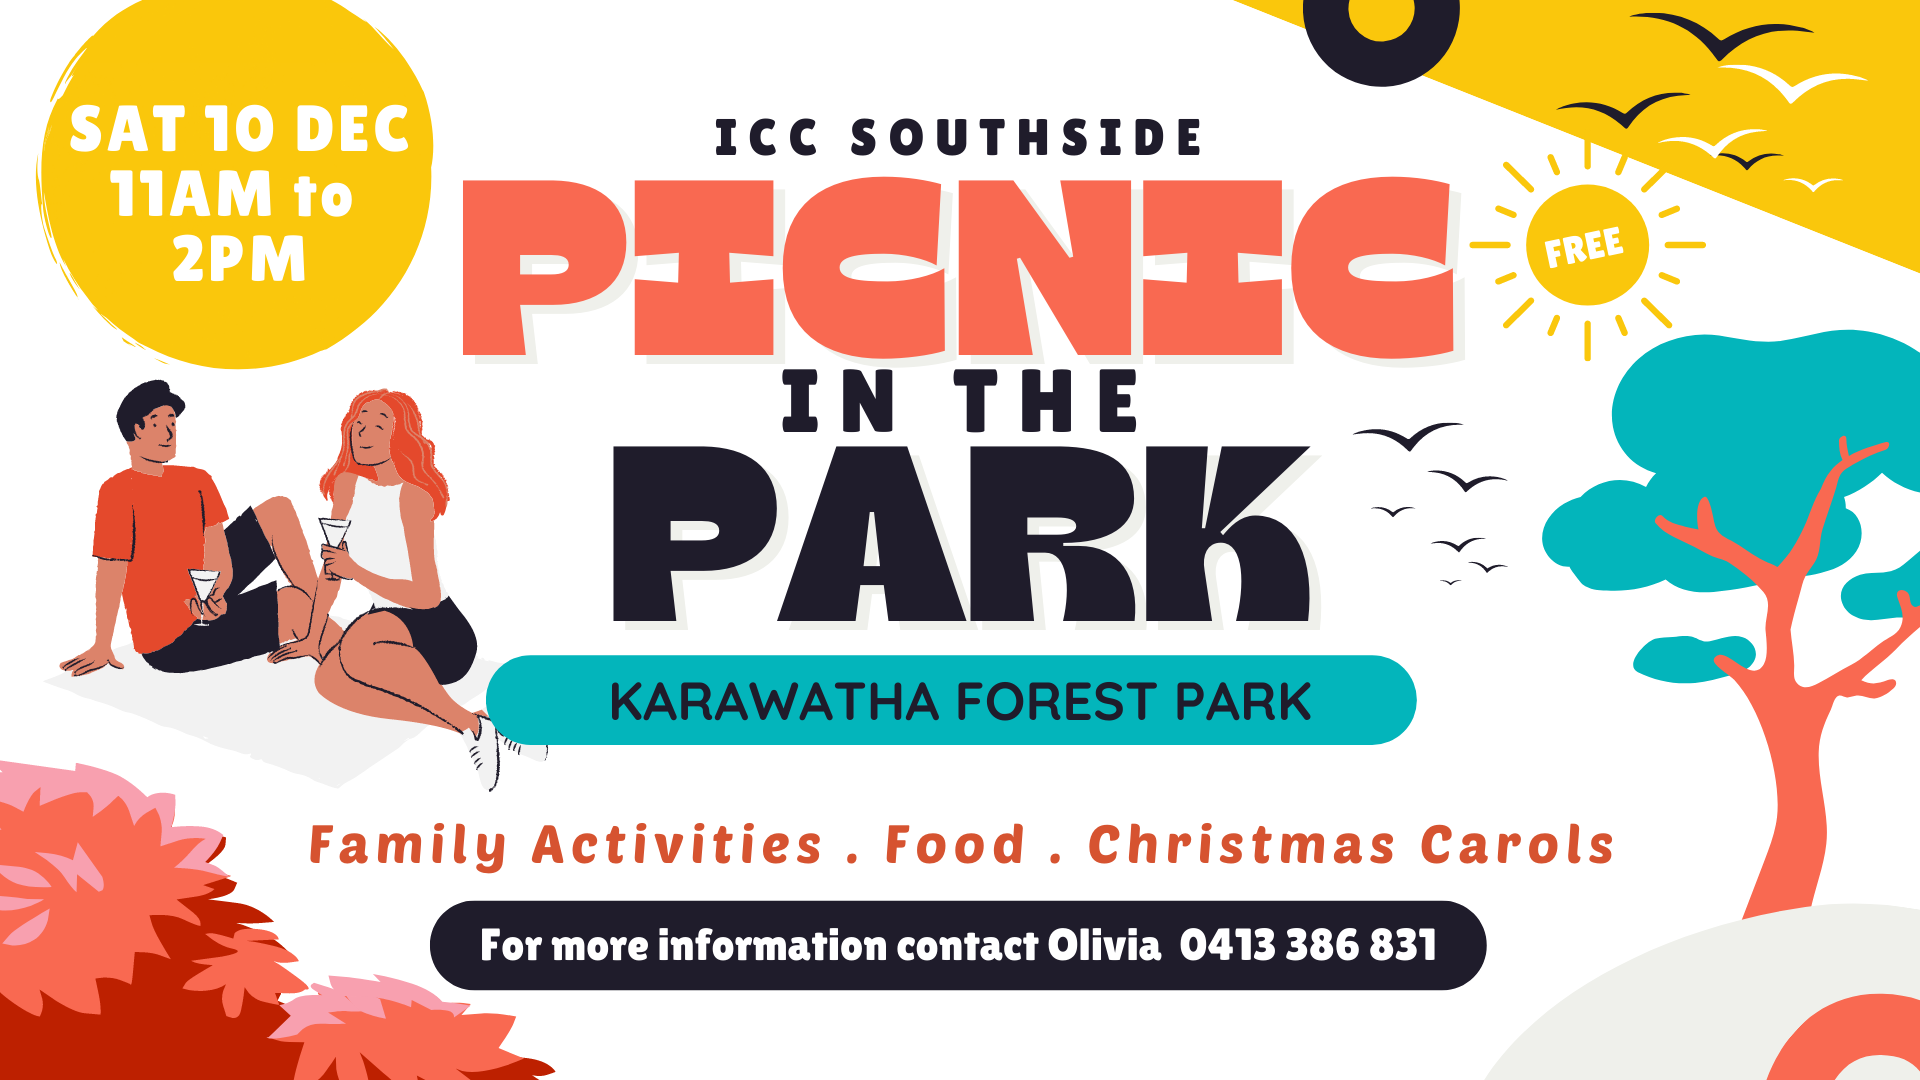 ICC Southside - Picnic In the Park